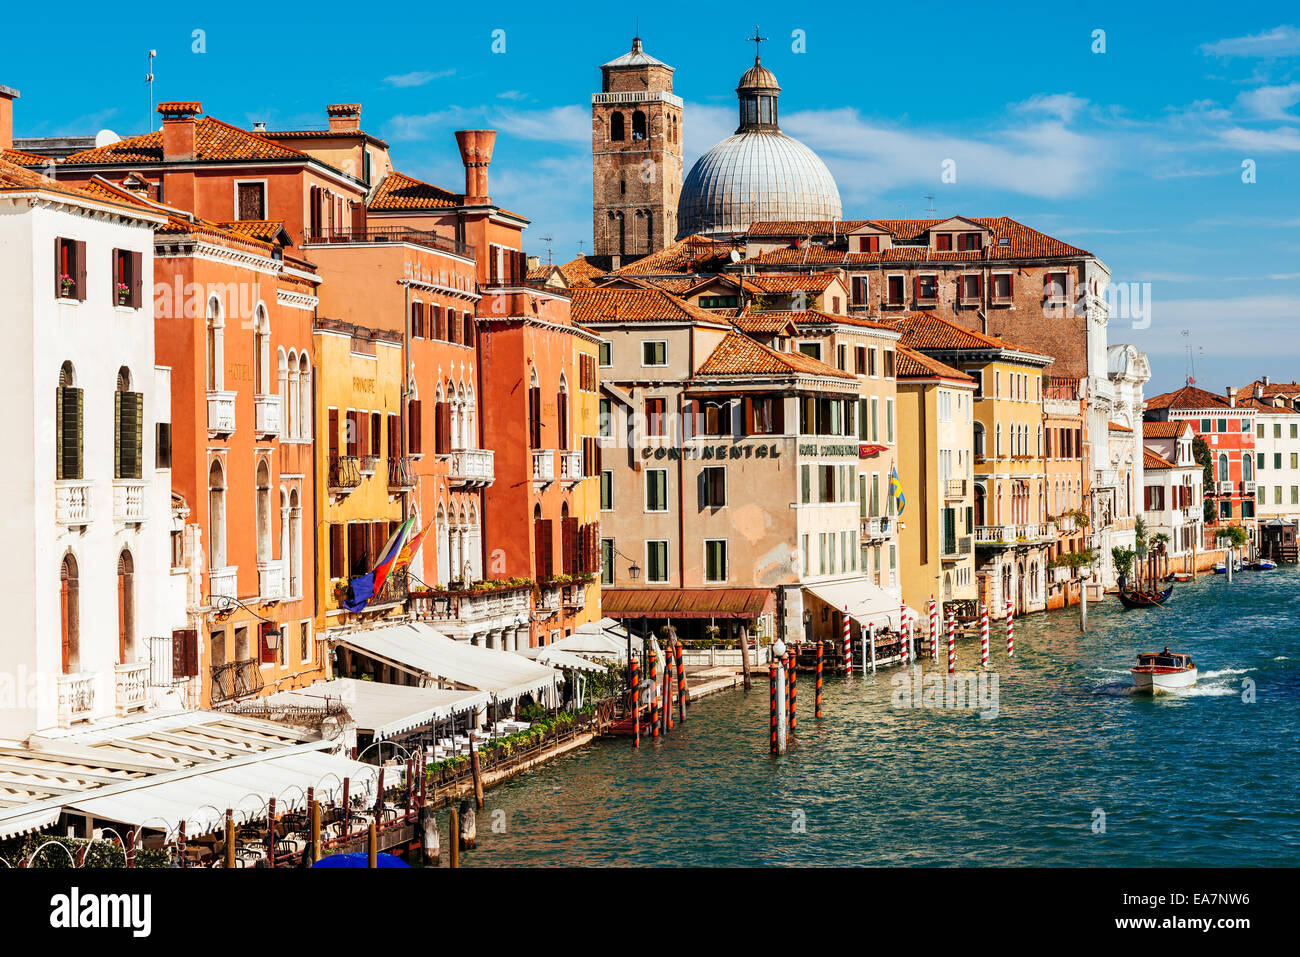 VENICE, ITALY - 26 OCTOBER 2014: Church San Geremia and hotels on Grand Canal in Venice Stock Photo